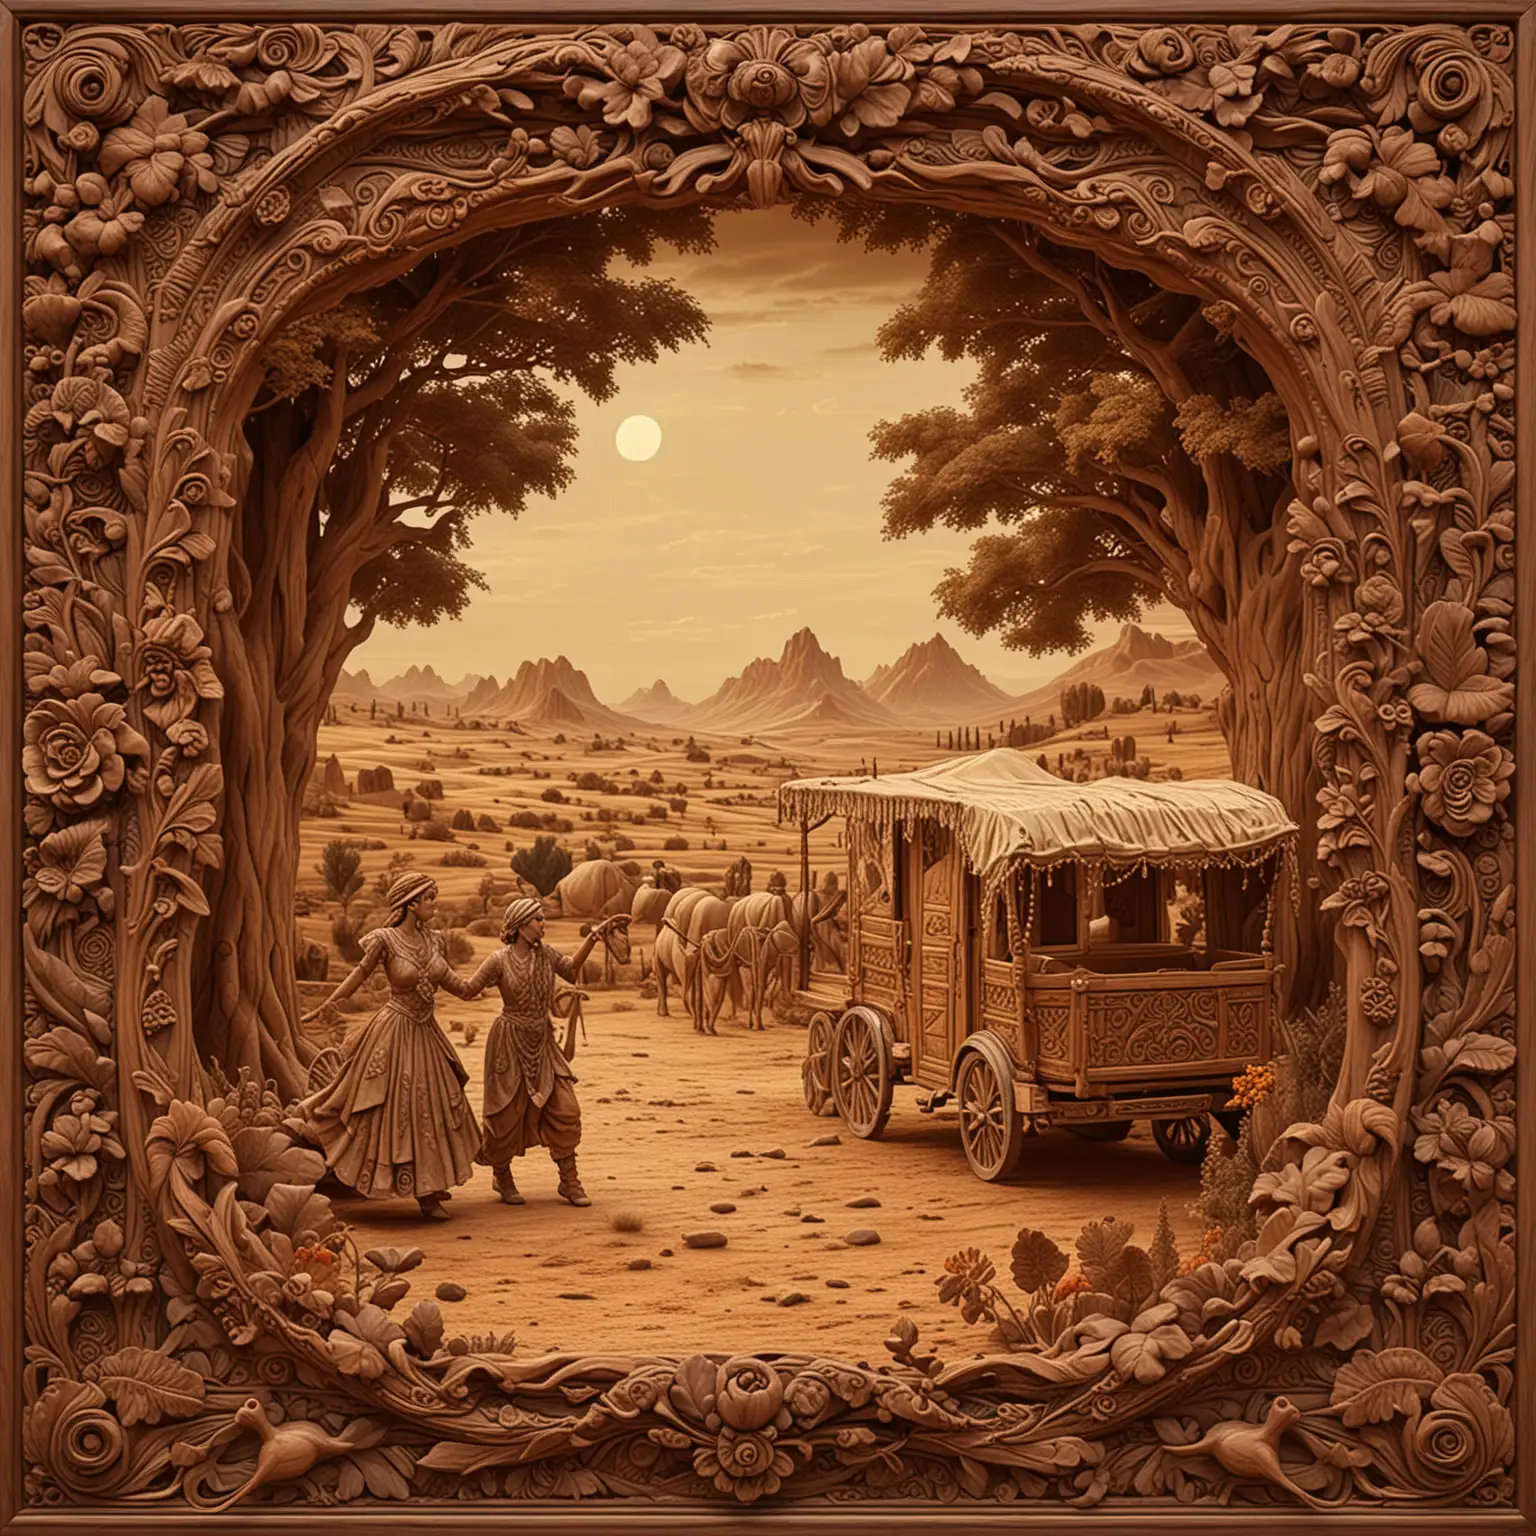 3D-Seamless-and-Tileable-Lacquered-Wood-Frame-with-Carved-Gypsy-Dancer-and-Caravan-Scene